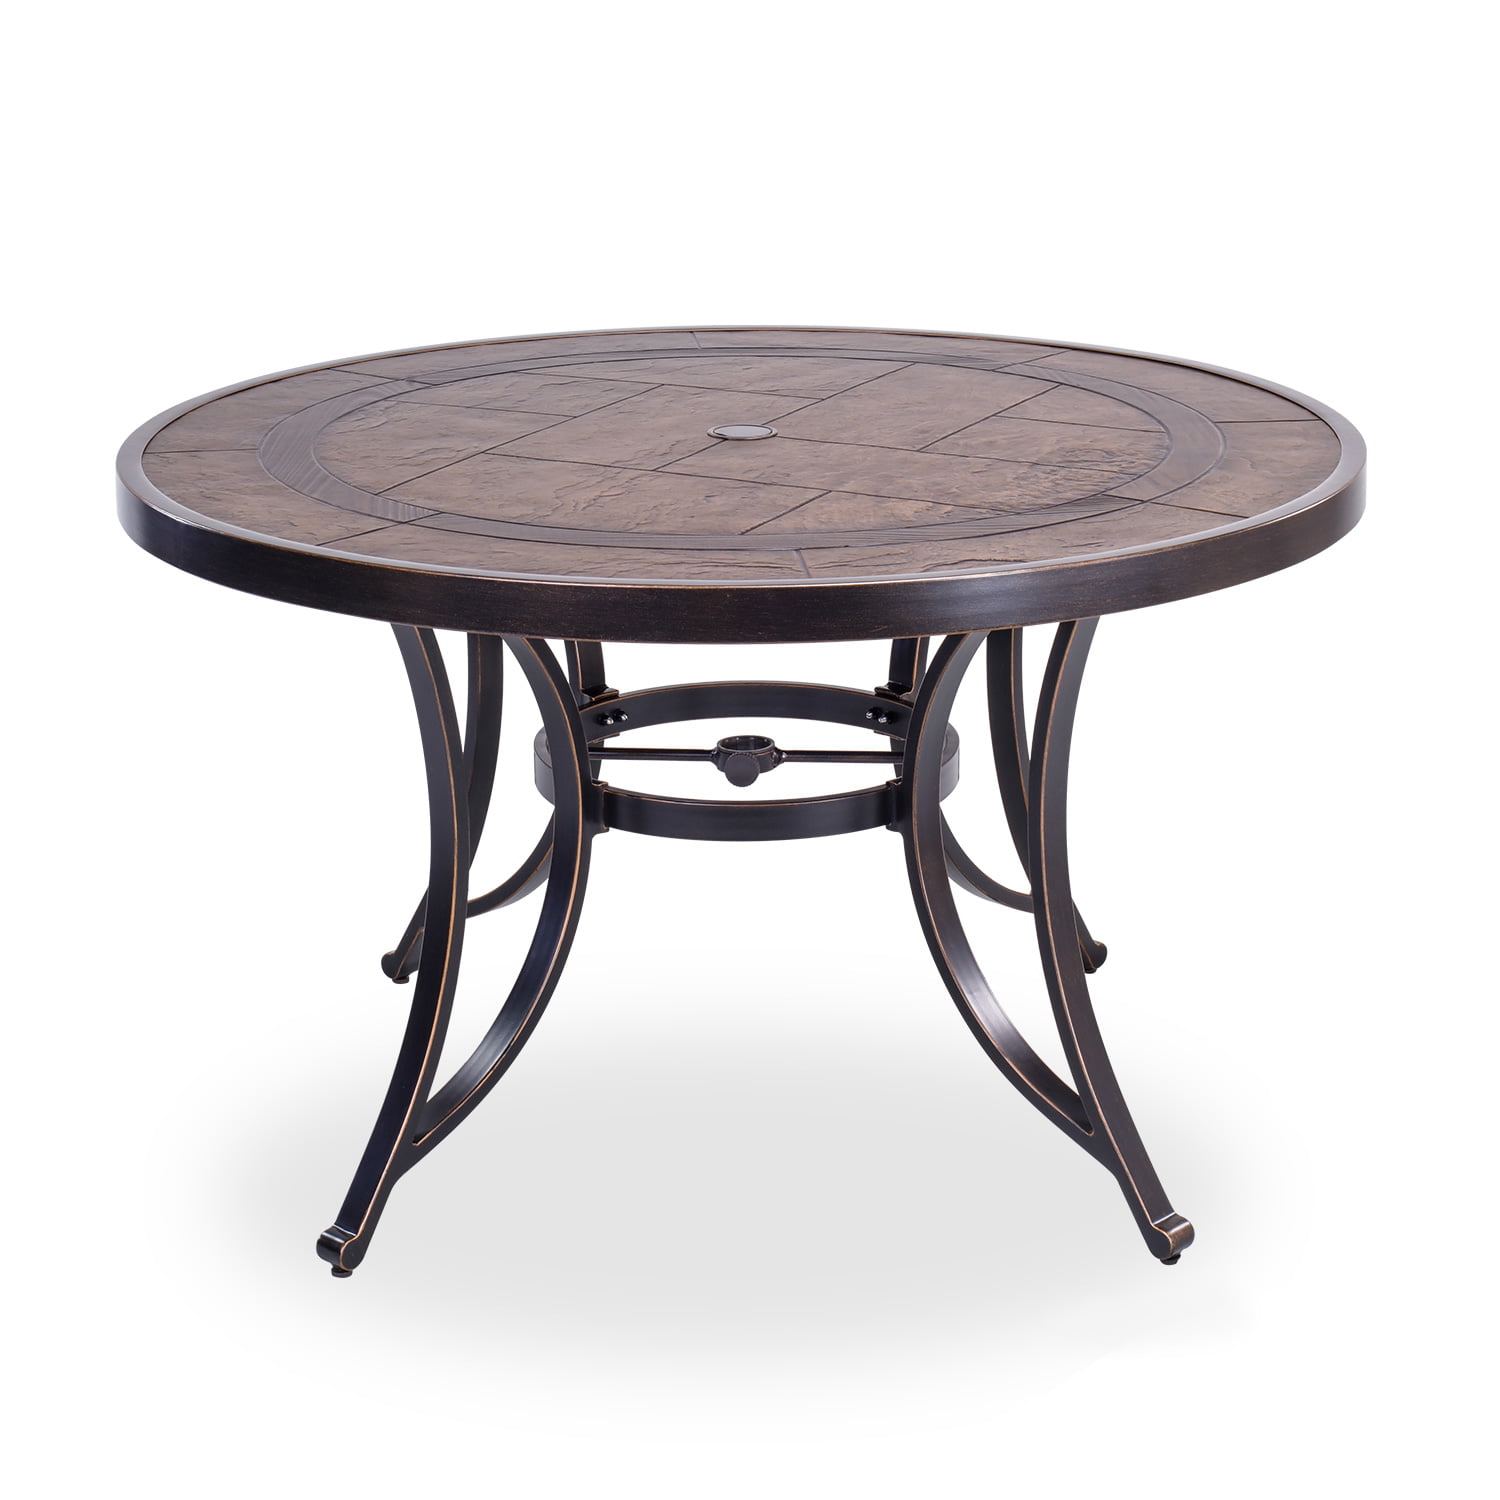 48 Round Dining Table Waterproof, 48 Round Table Top Outdoor